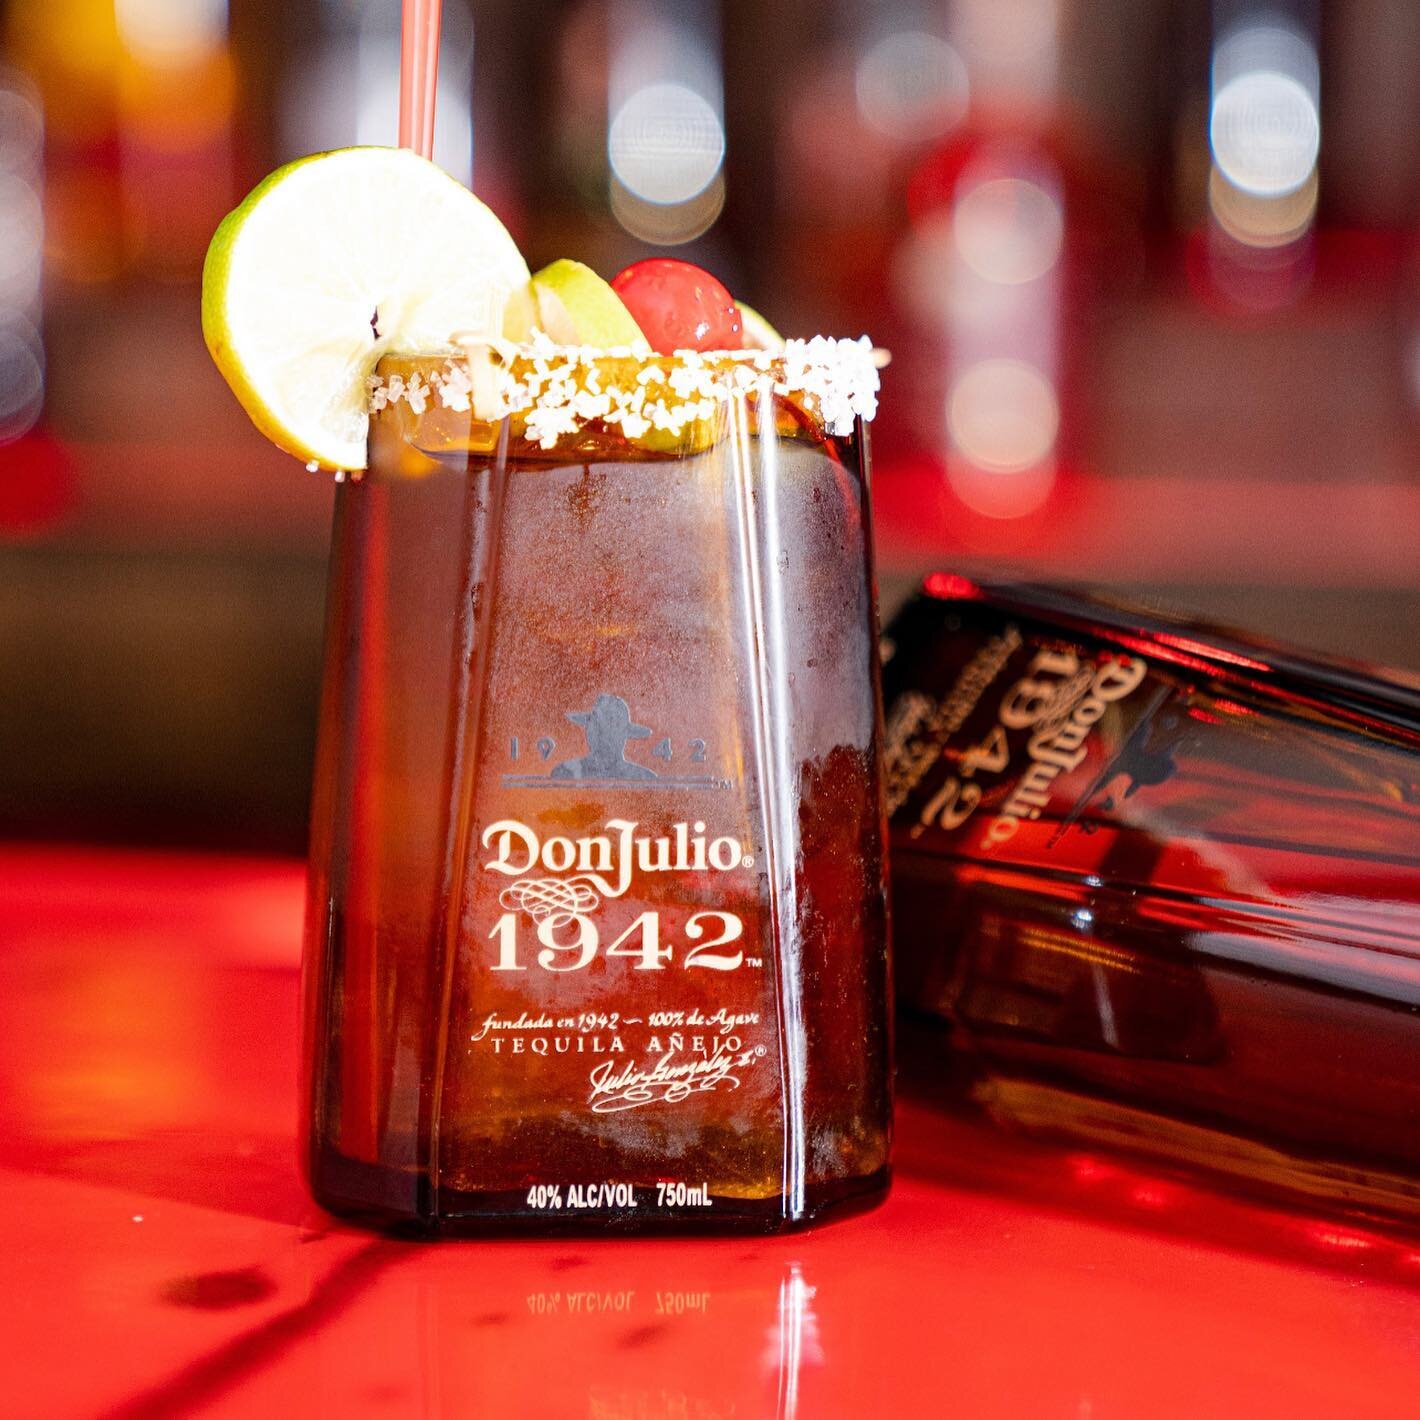 Indulge in Vaka's Exquisite Margarita: Crafted with Authentic @donjuliotequila #1942, Served in a Handcrafted Cup Fashioned from Real Don Julio 1942 Bottles!

@vakarestaurant invites you to experience their one-of-a-kind margarita, showcasing the fin